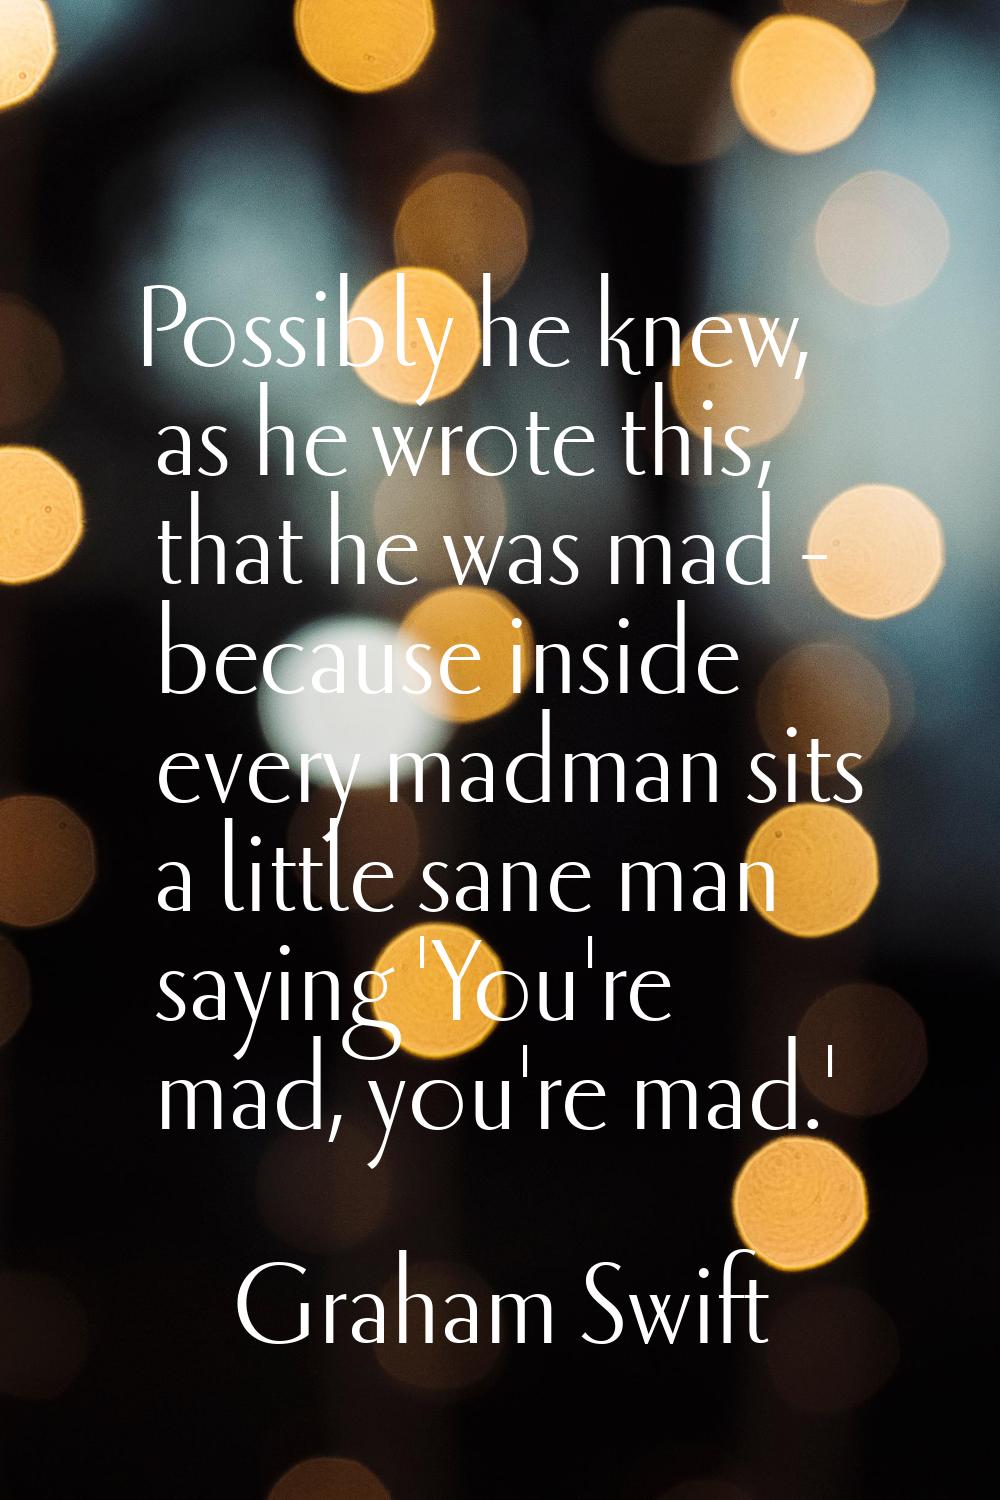 Possibly he knew, as he wrote this, that he was mad - because inside every madman sits a little san